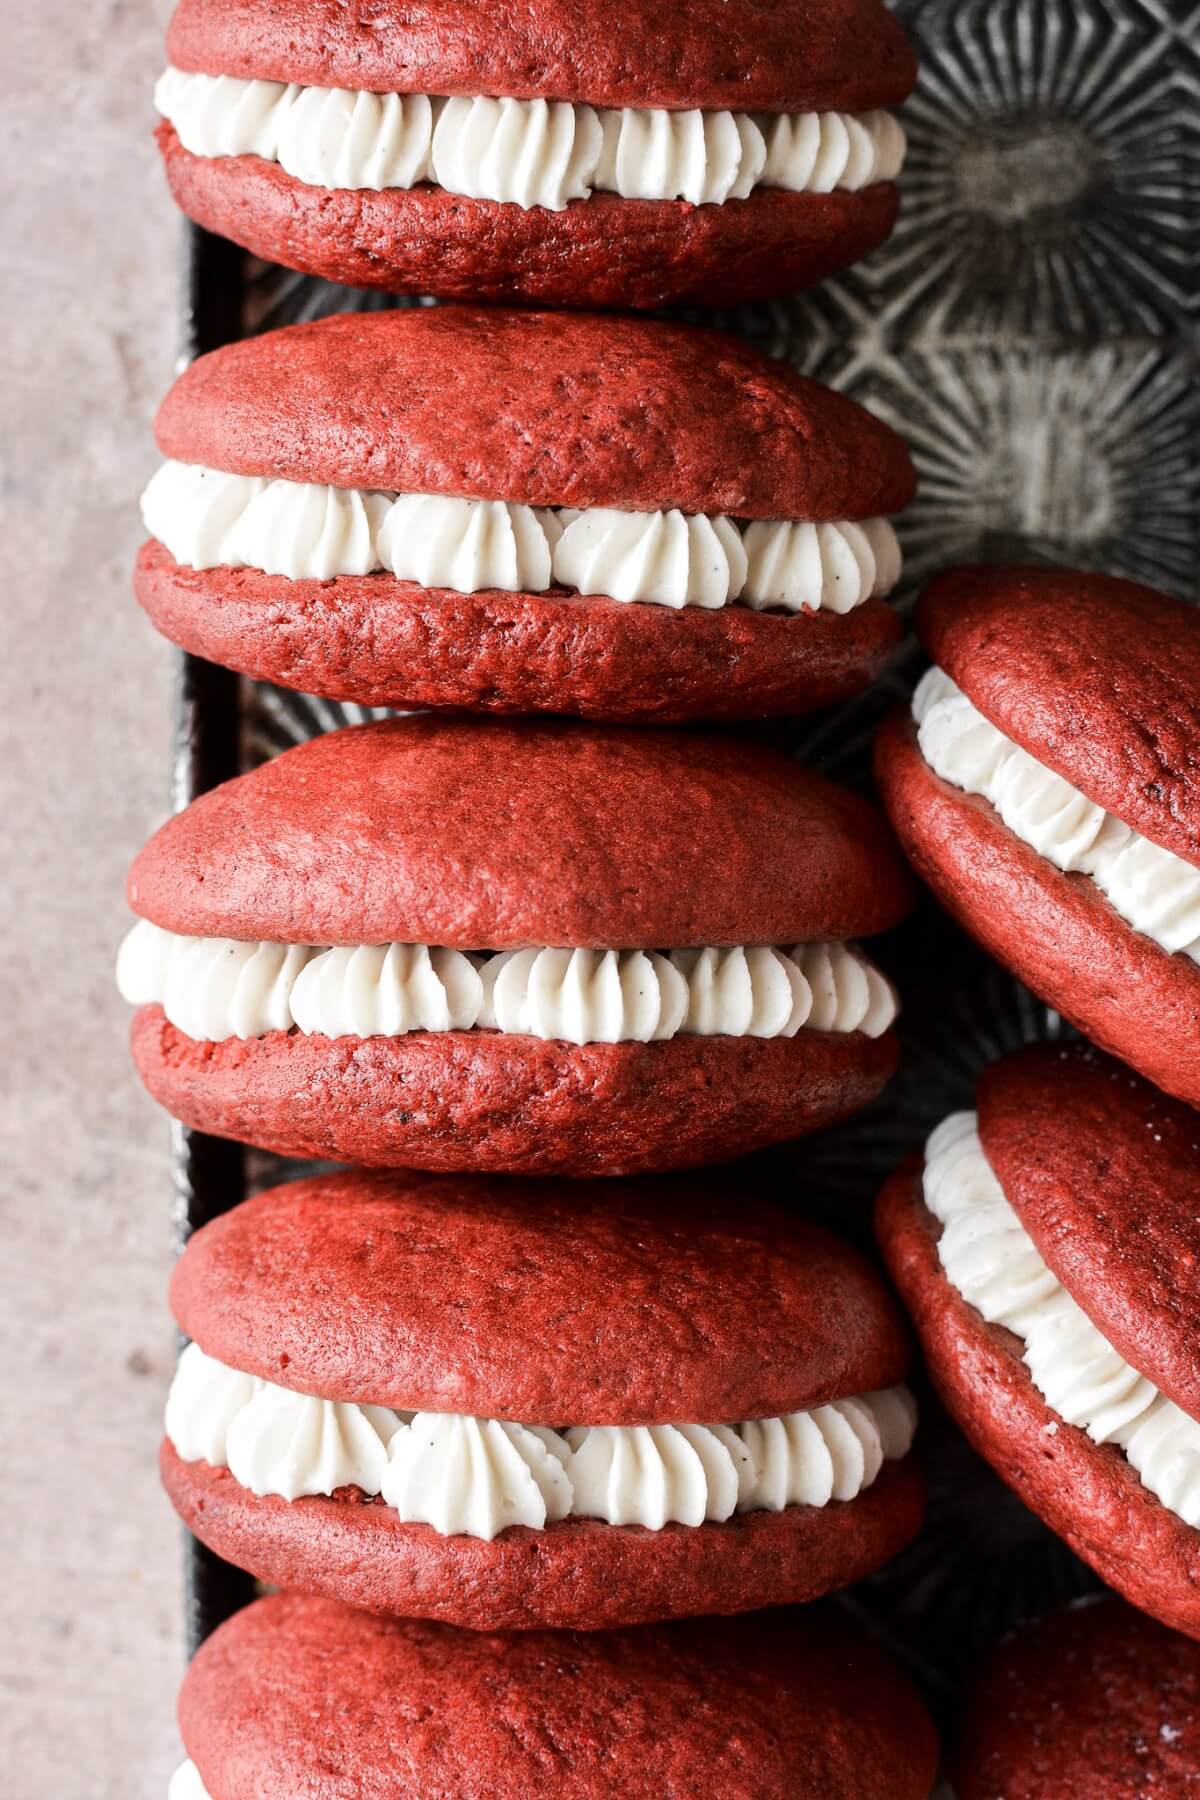 Red velvet cake whoopie pies filled with cream cheese frosting.